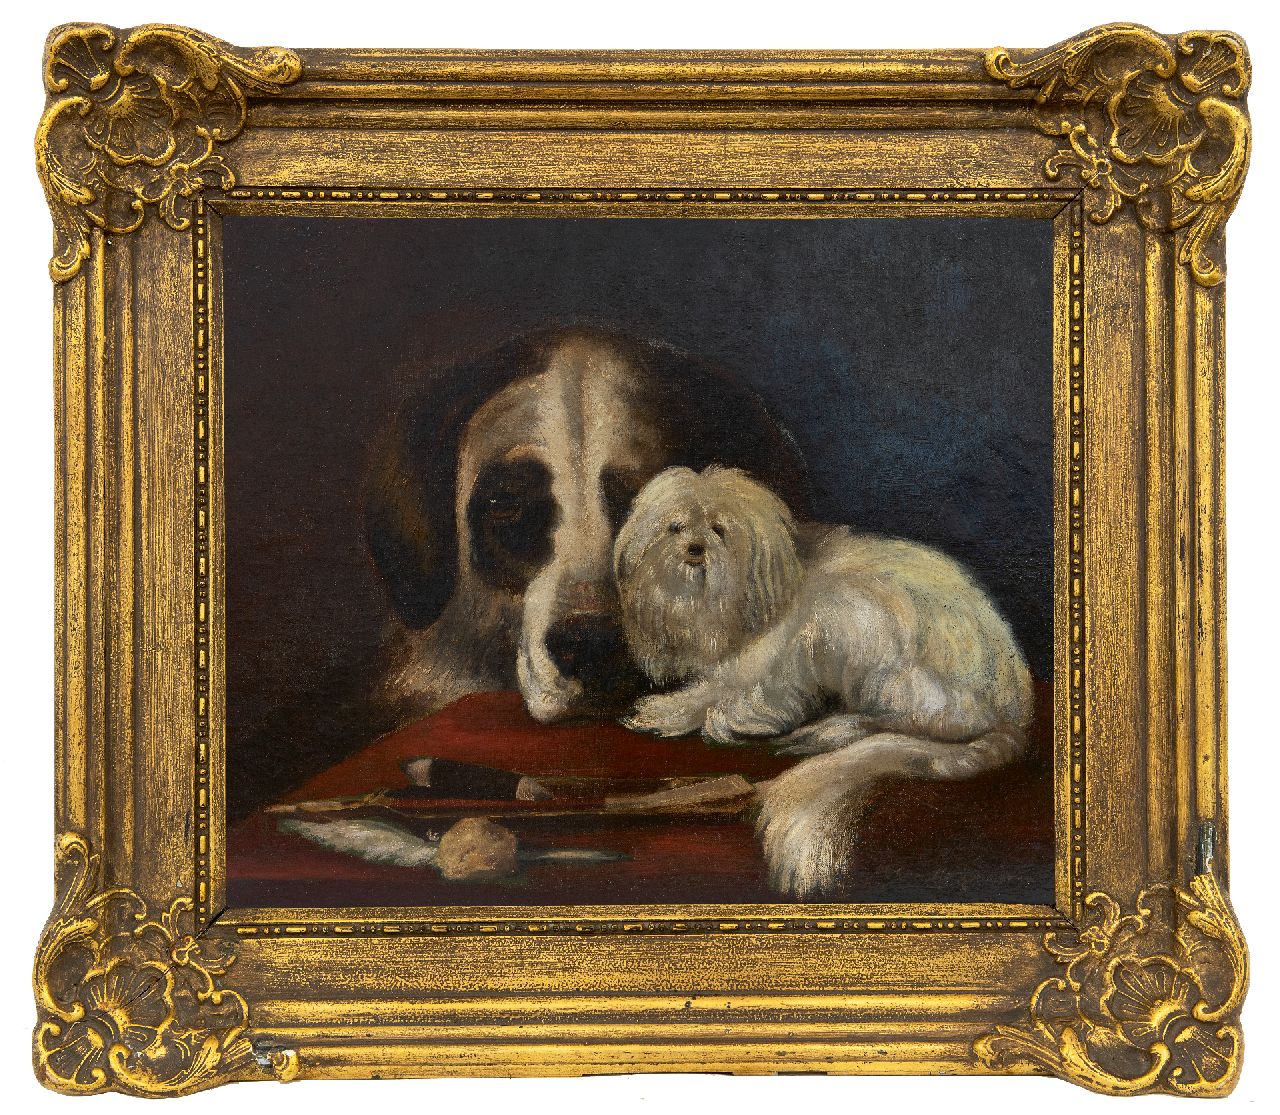 Ronner-Knip H.  | Henriette Ronner-Knip | Paintings offered for sale | Big and small, oil on canvas 36.4 x 43.2 cm, signed l.r. and dated '99